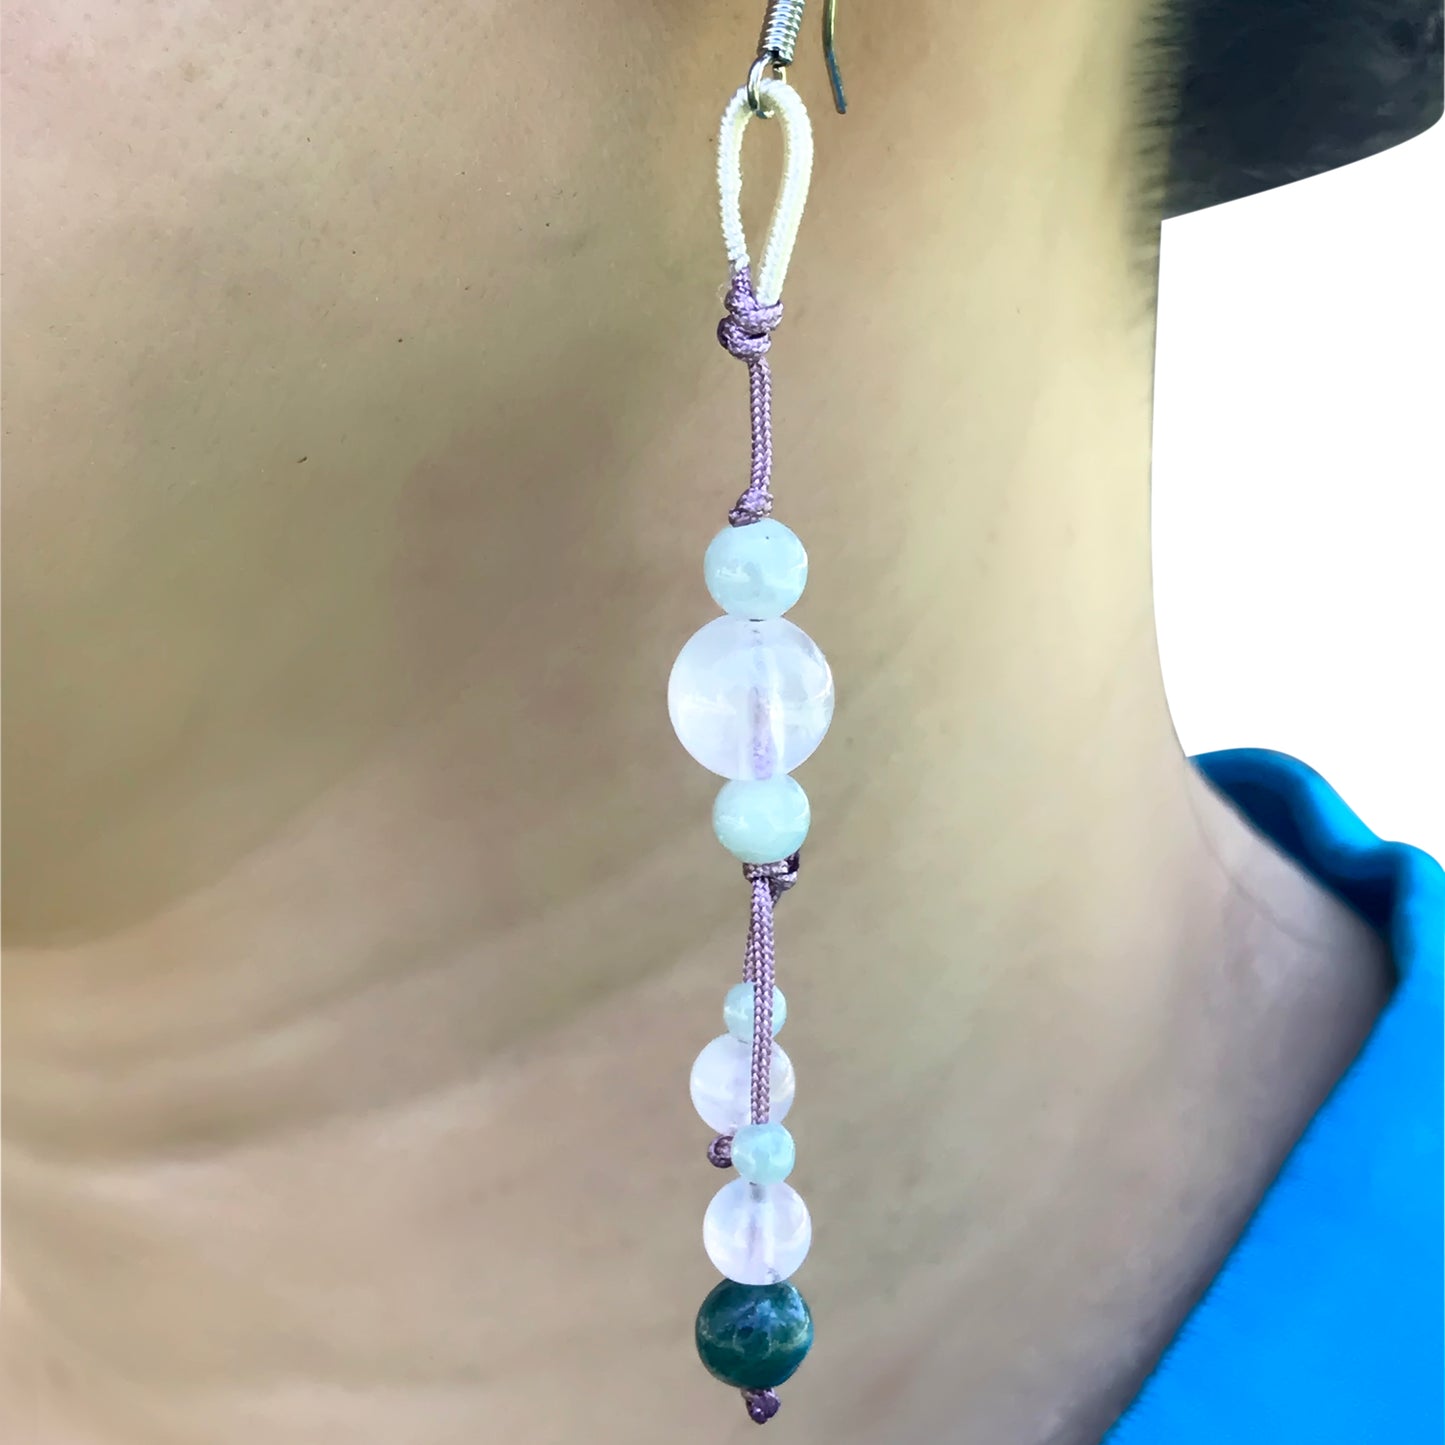 Add a Splash of Color with Irresistible Rose Quartz Beads Earrings made with Lavender Cord